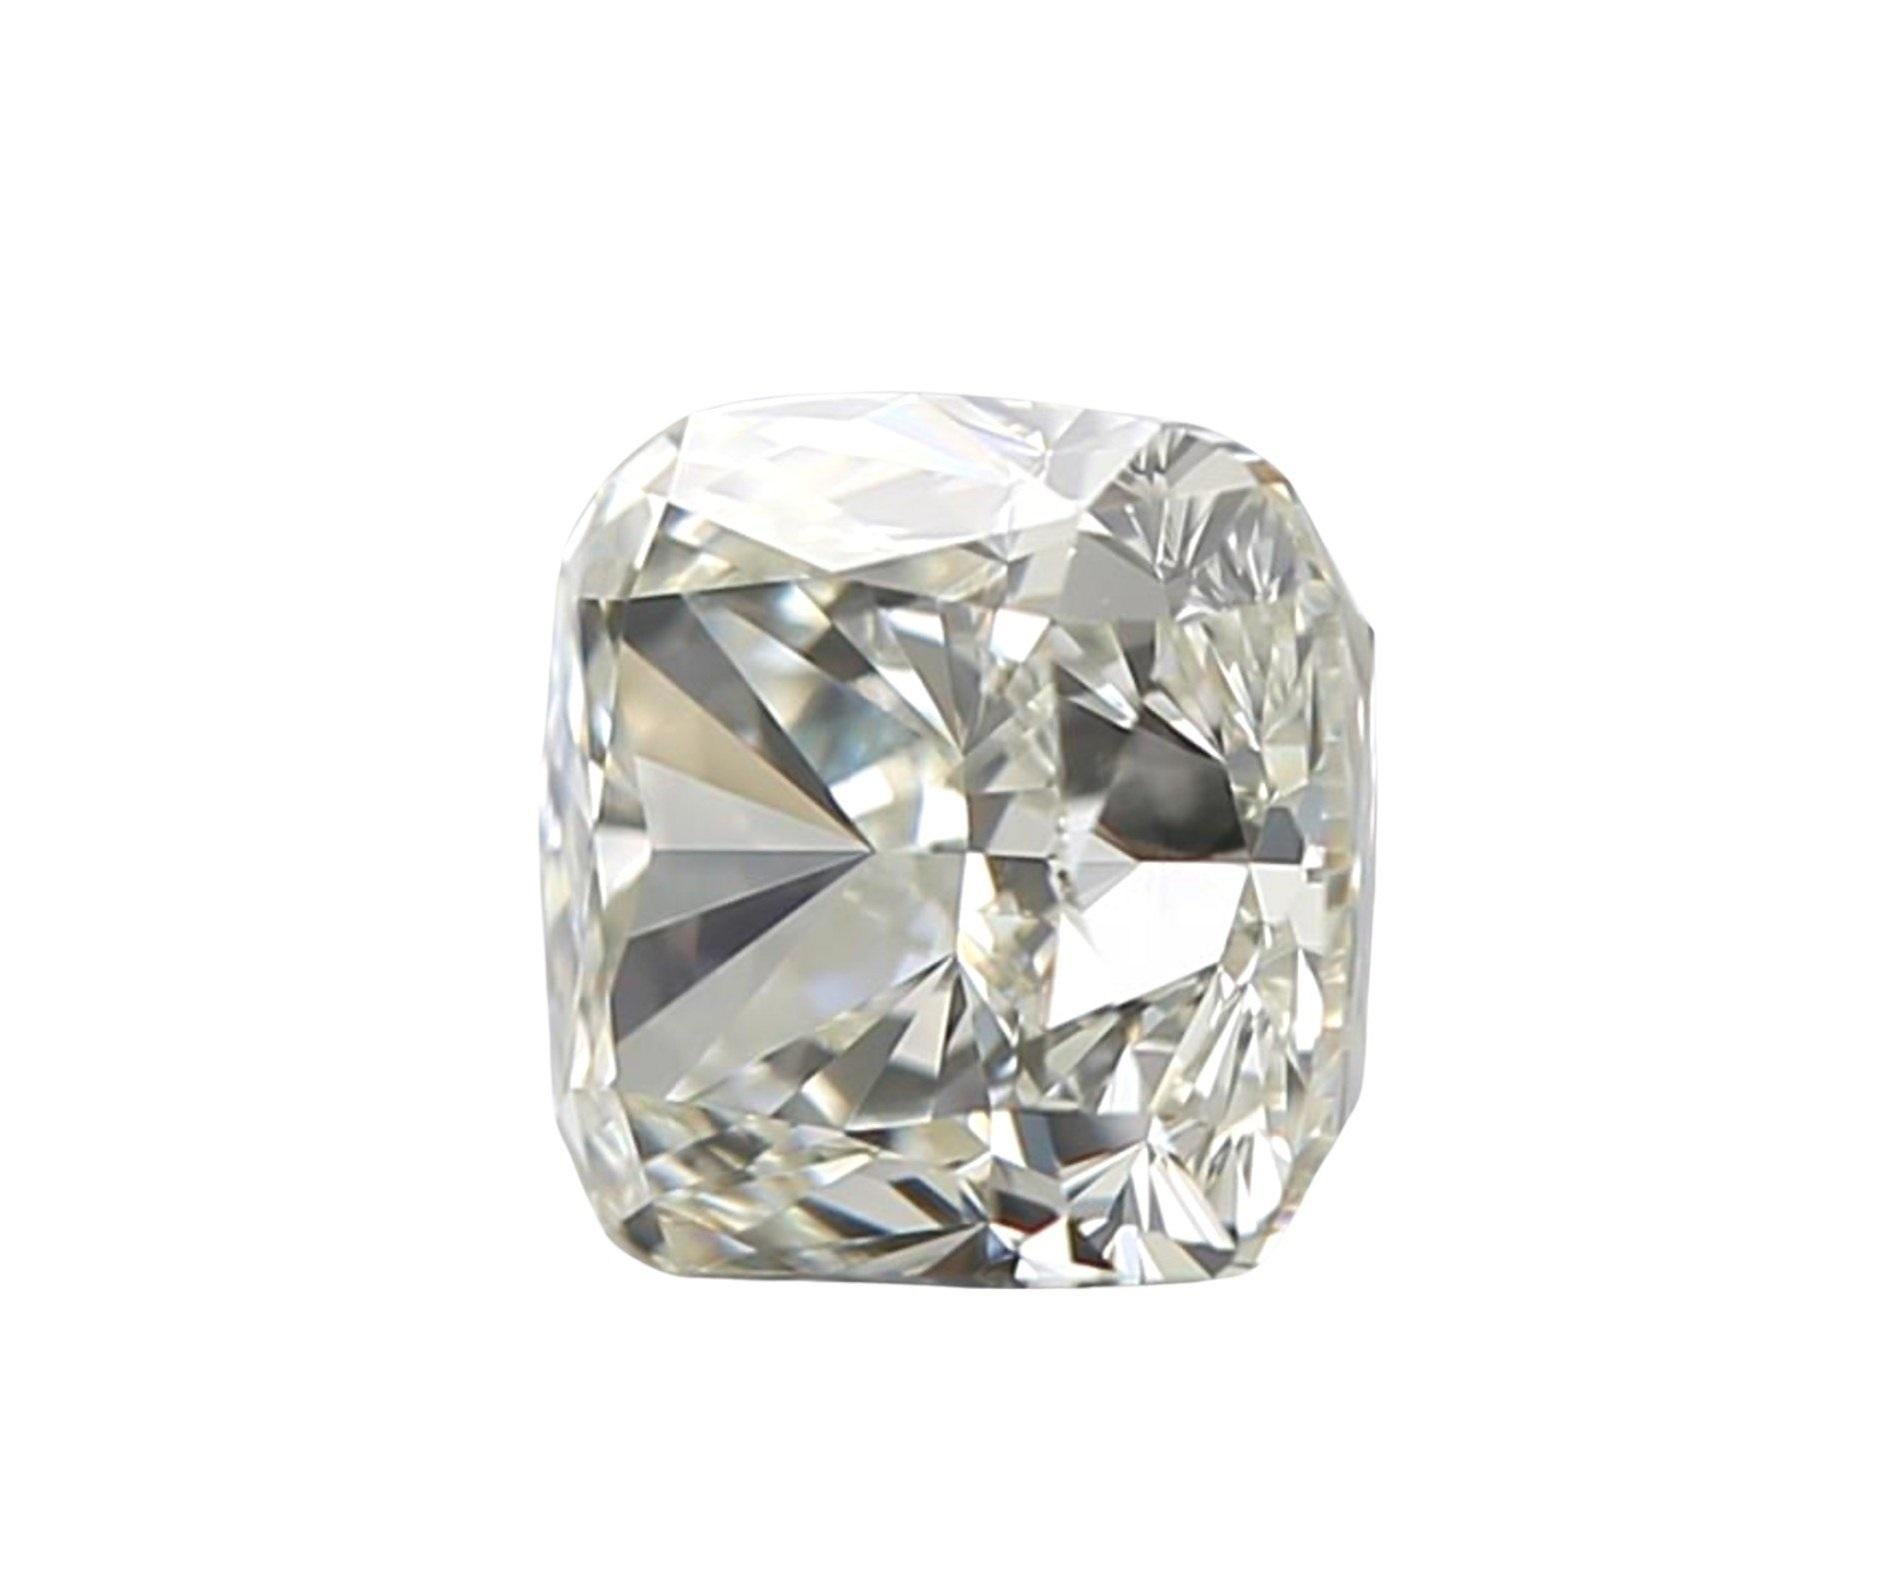 Natural cushion modified brilliant diamond in a 0.71 carat J VS1 with excellent cut and extremely shine. This diamond comes with an GIA Certificate and laser inscription number.

SKU: T200-9A

GIA 2444032082